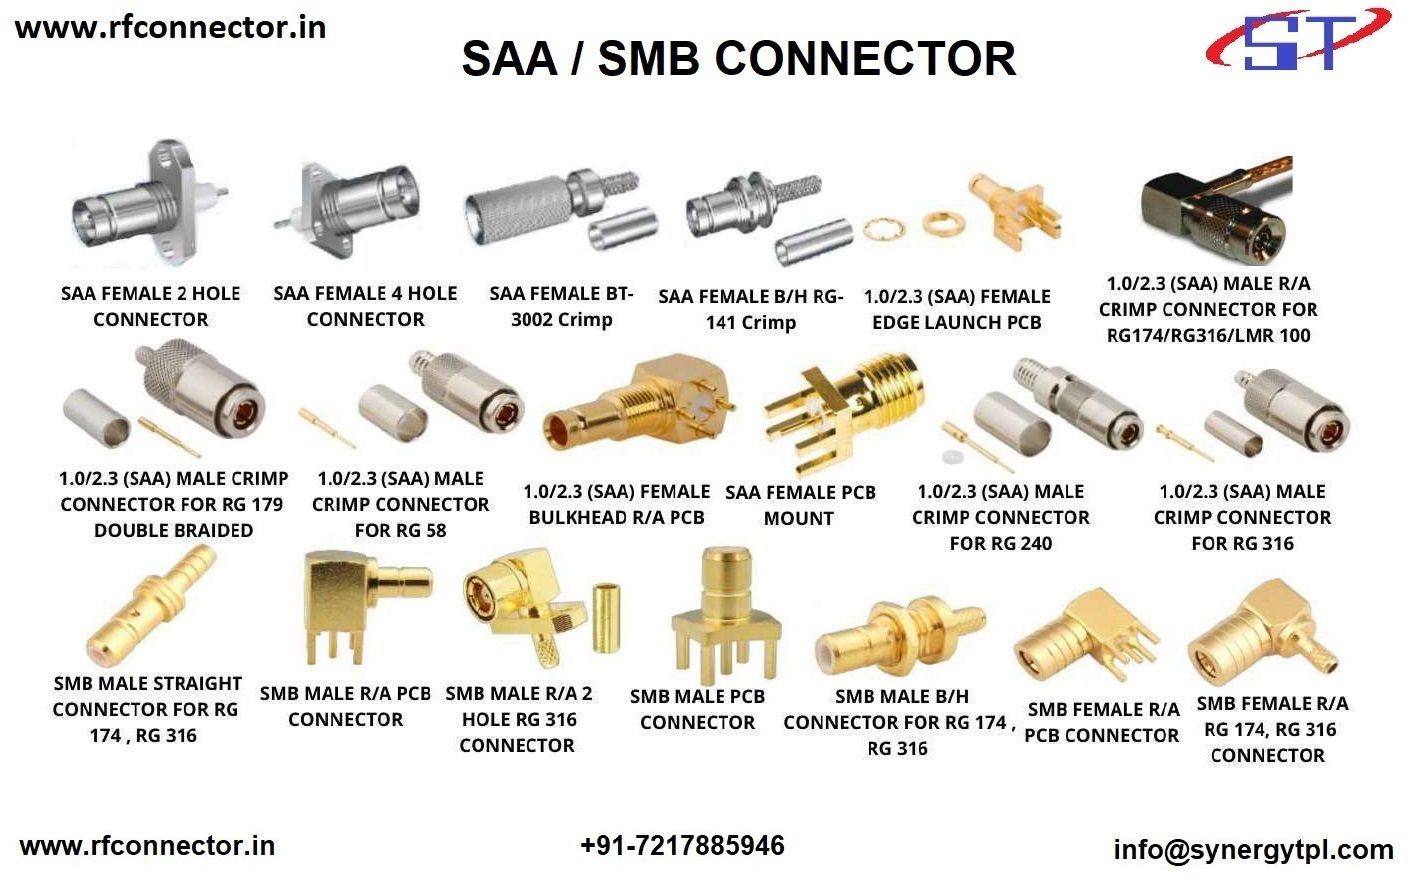 SMB female right angle crimp connector for LMR 100 cable